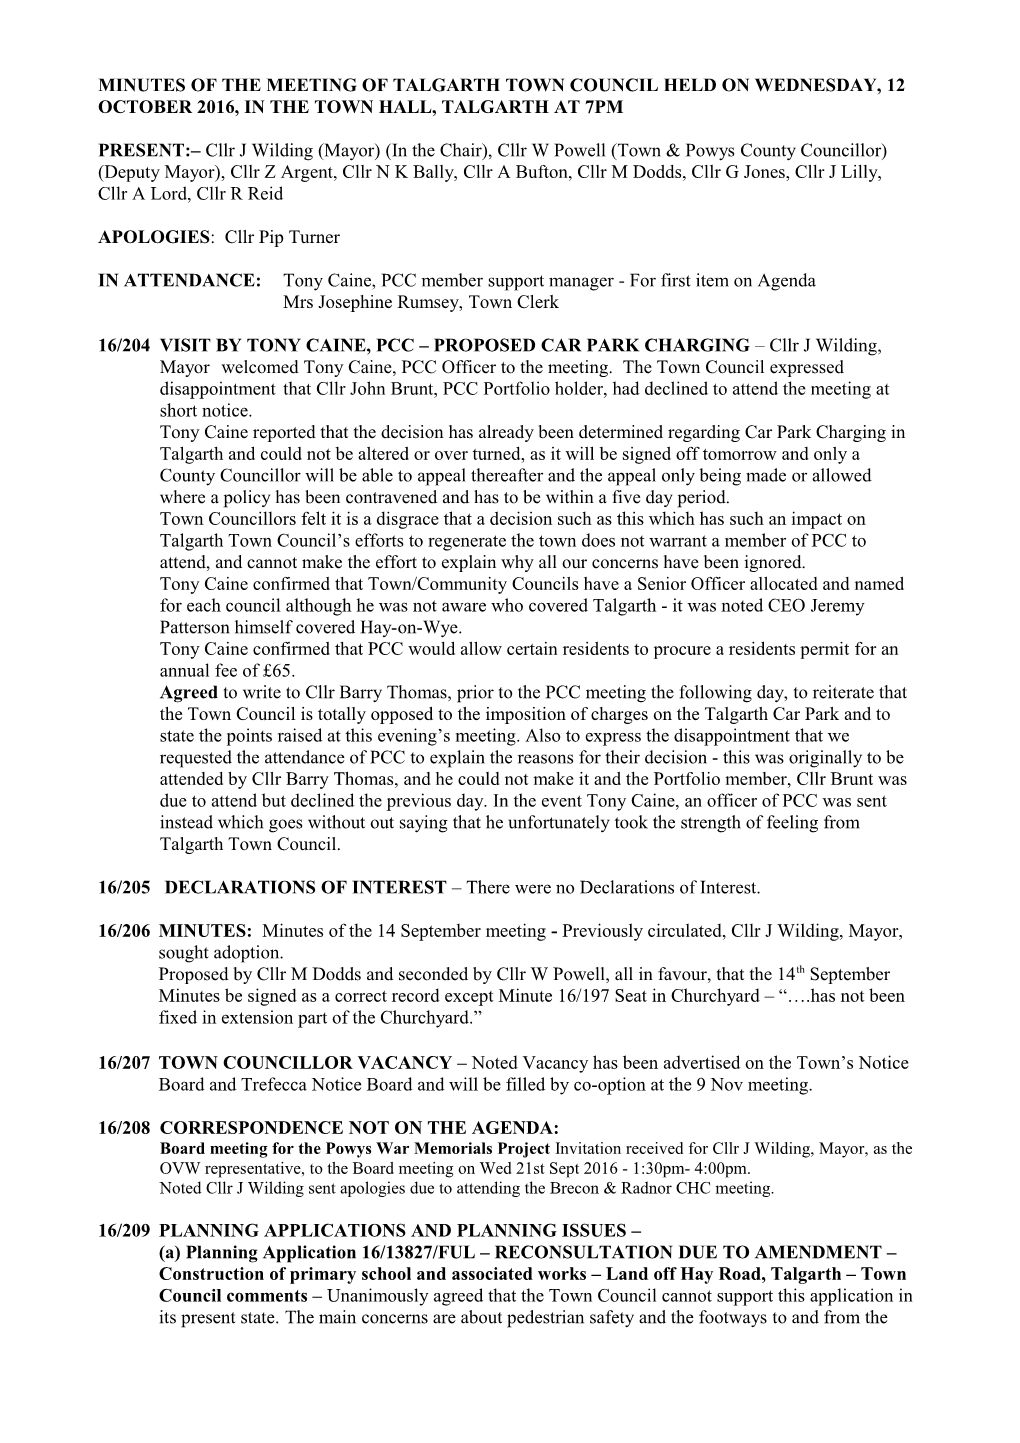 Minutes of the Meeting of Talgarth Town Council Held on Wednesday, 10 October 2012, In s1